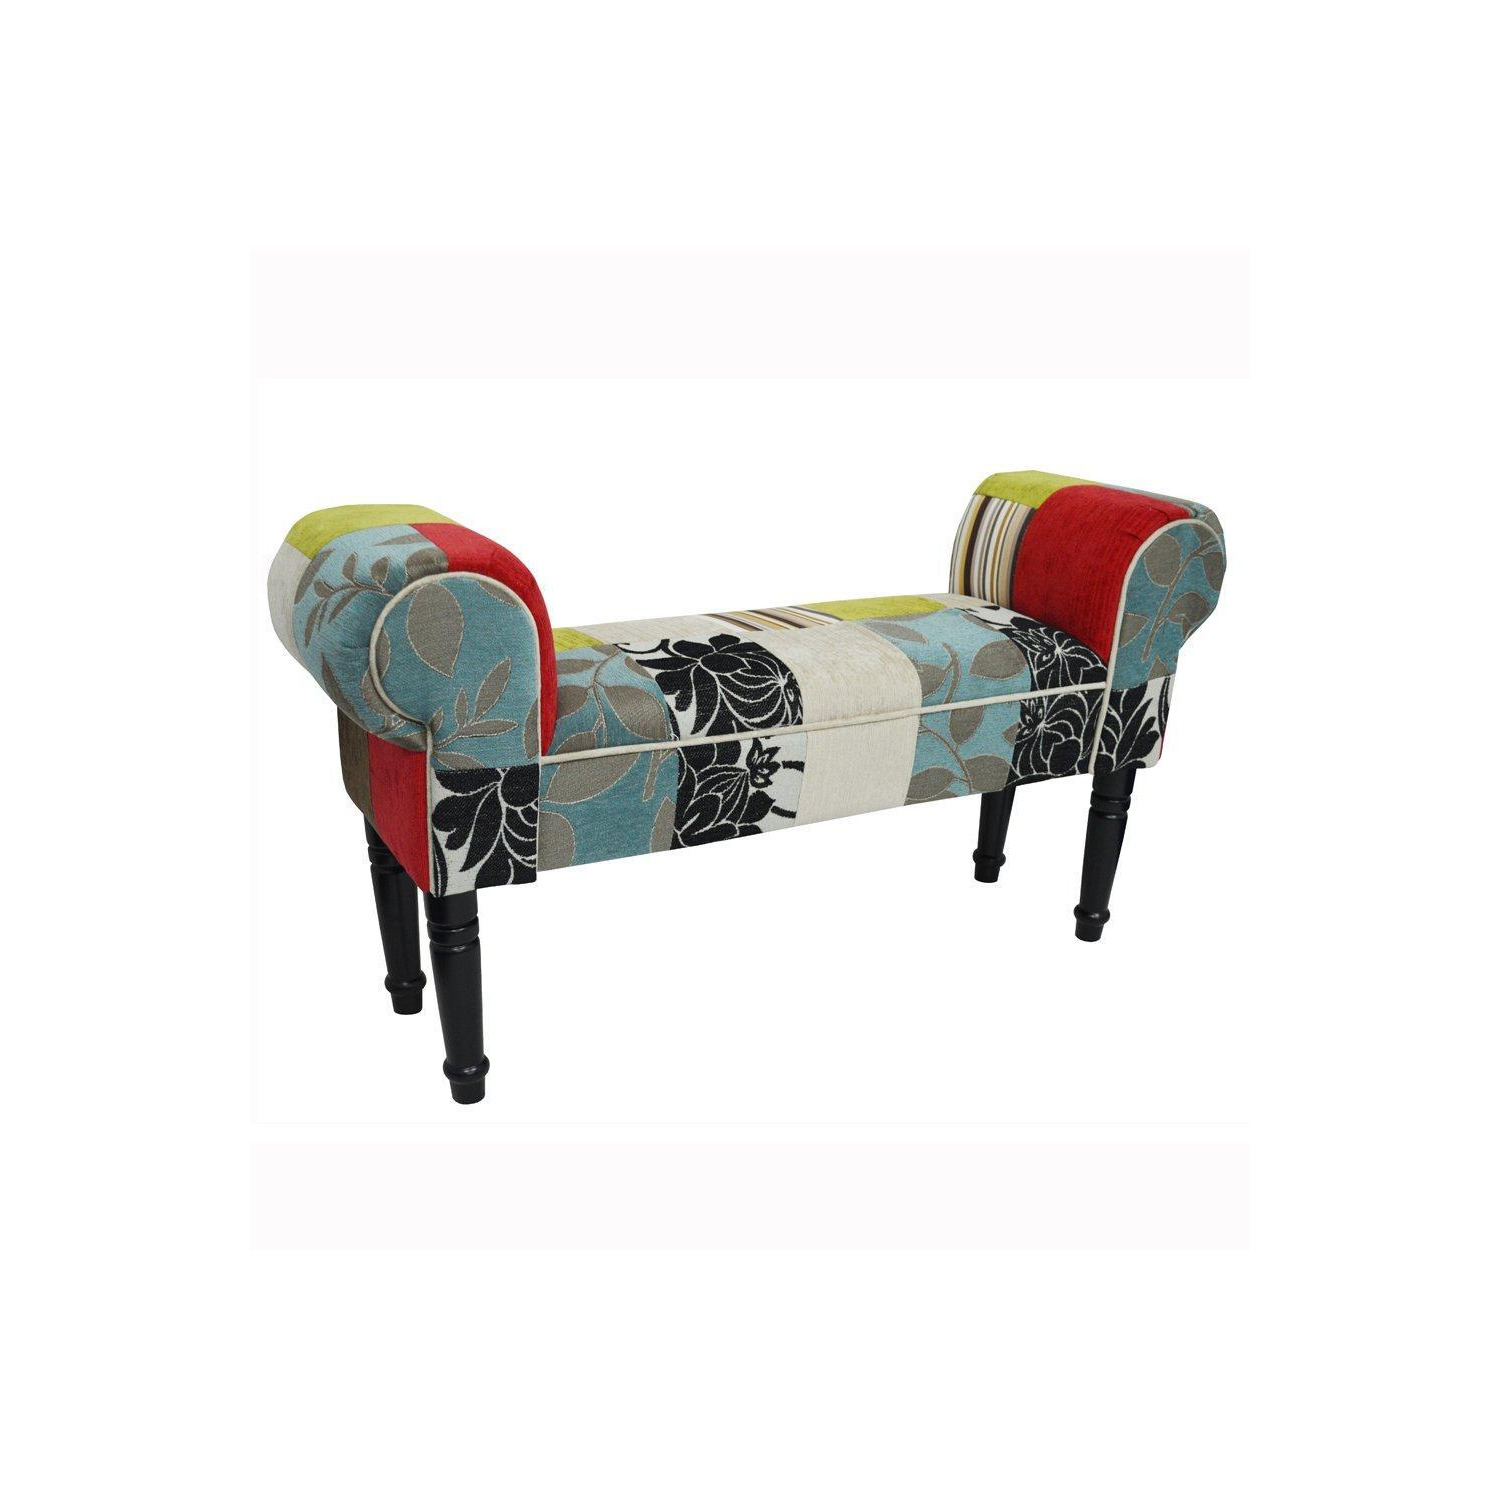 Plush Patchwork - Shabby Chic Chaise Pouffe Stool  Wood Legs - Blue  Green  Red - image 1